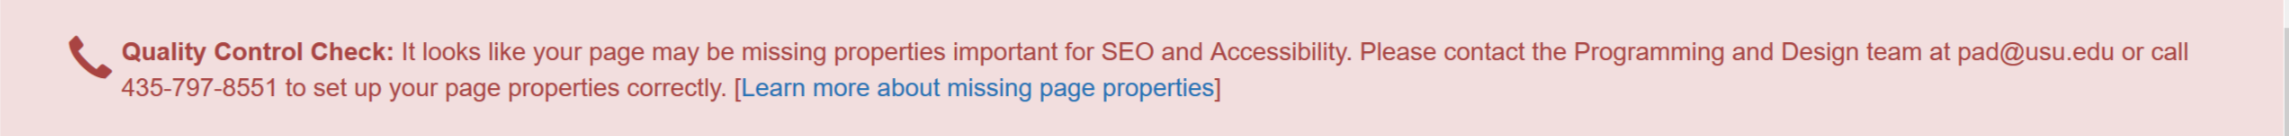 Quality Control Check:  You are missing important page properties for SEO and Accessibility